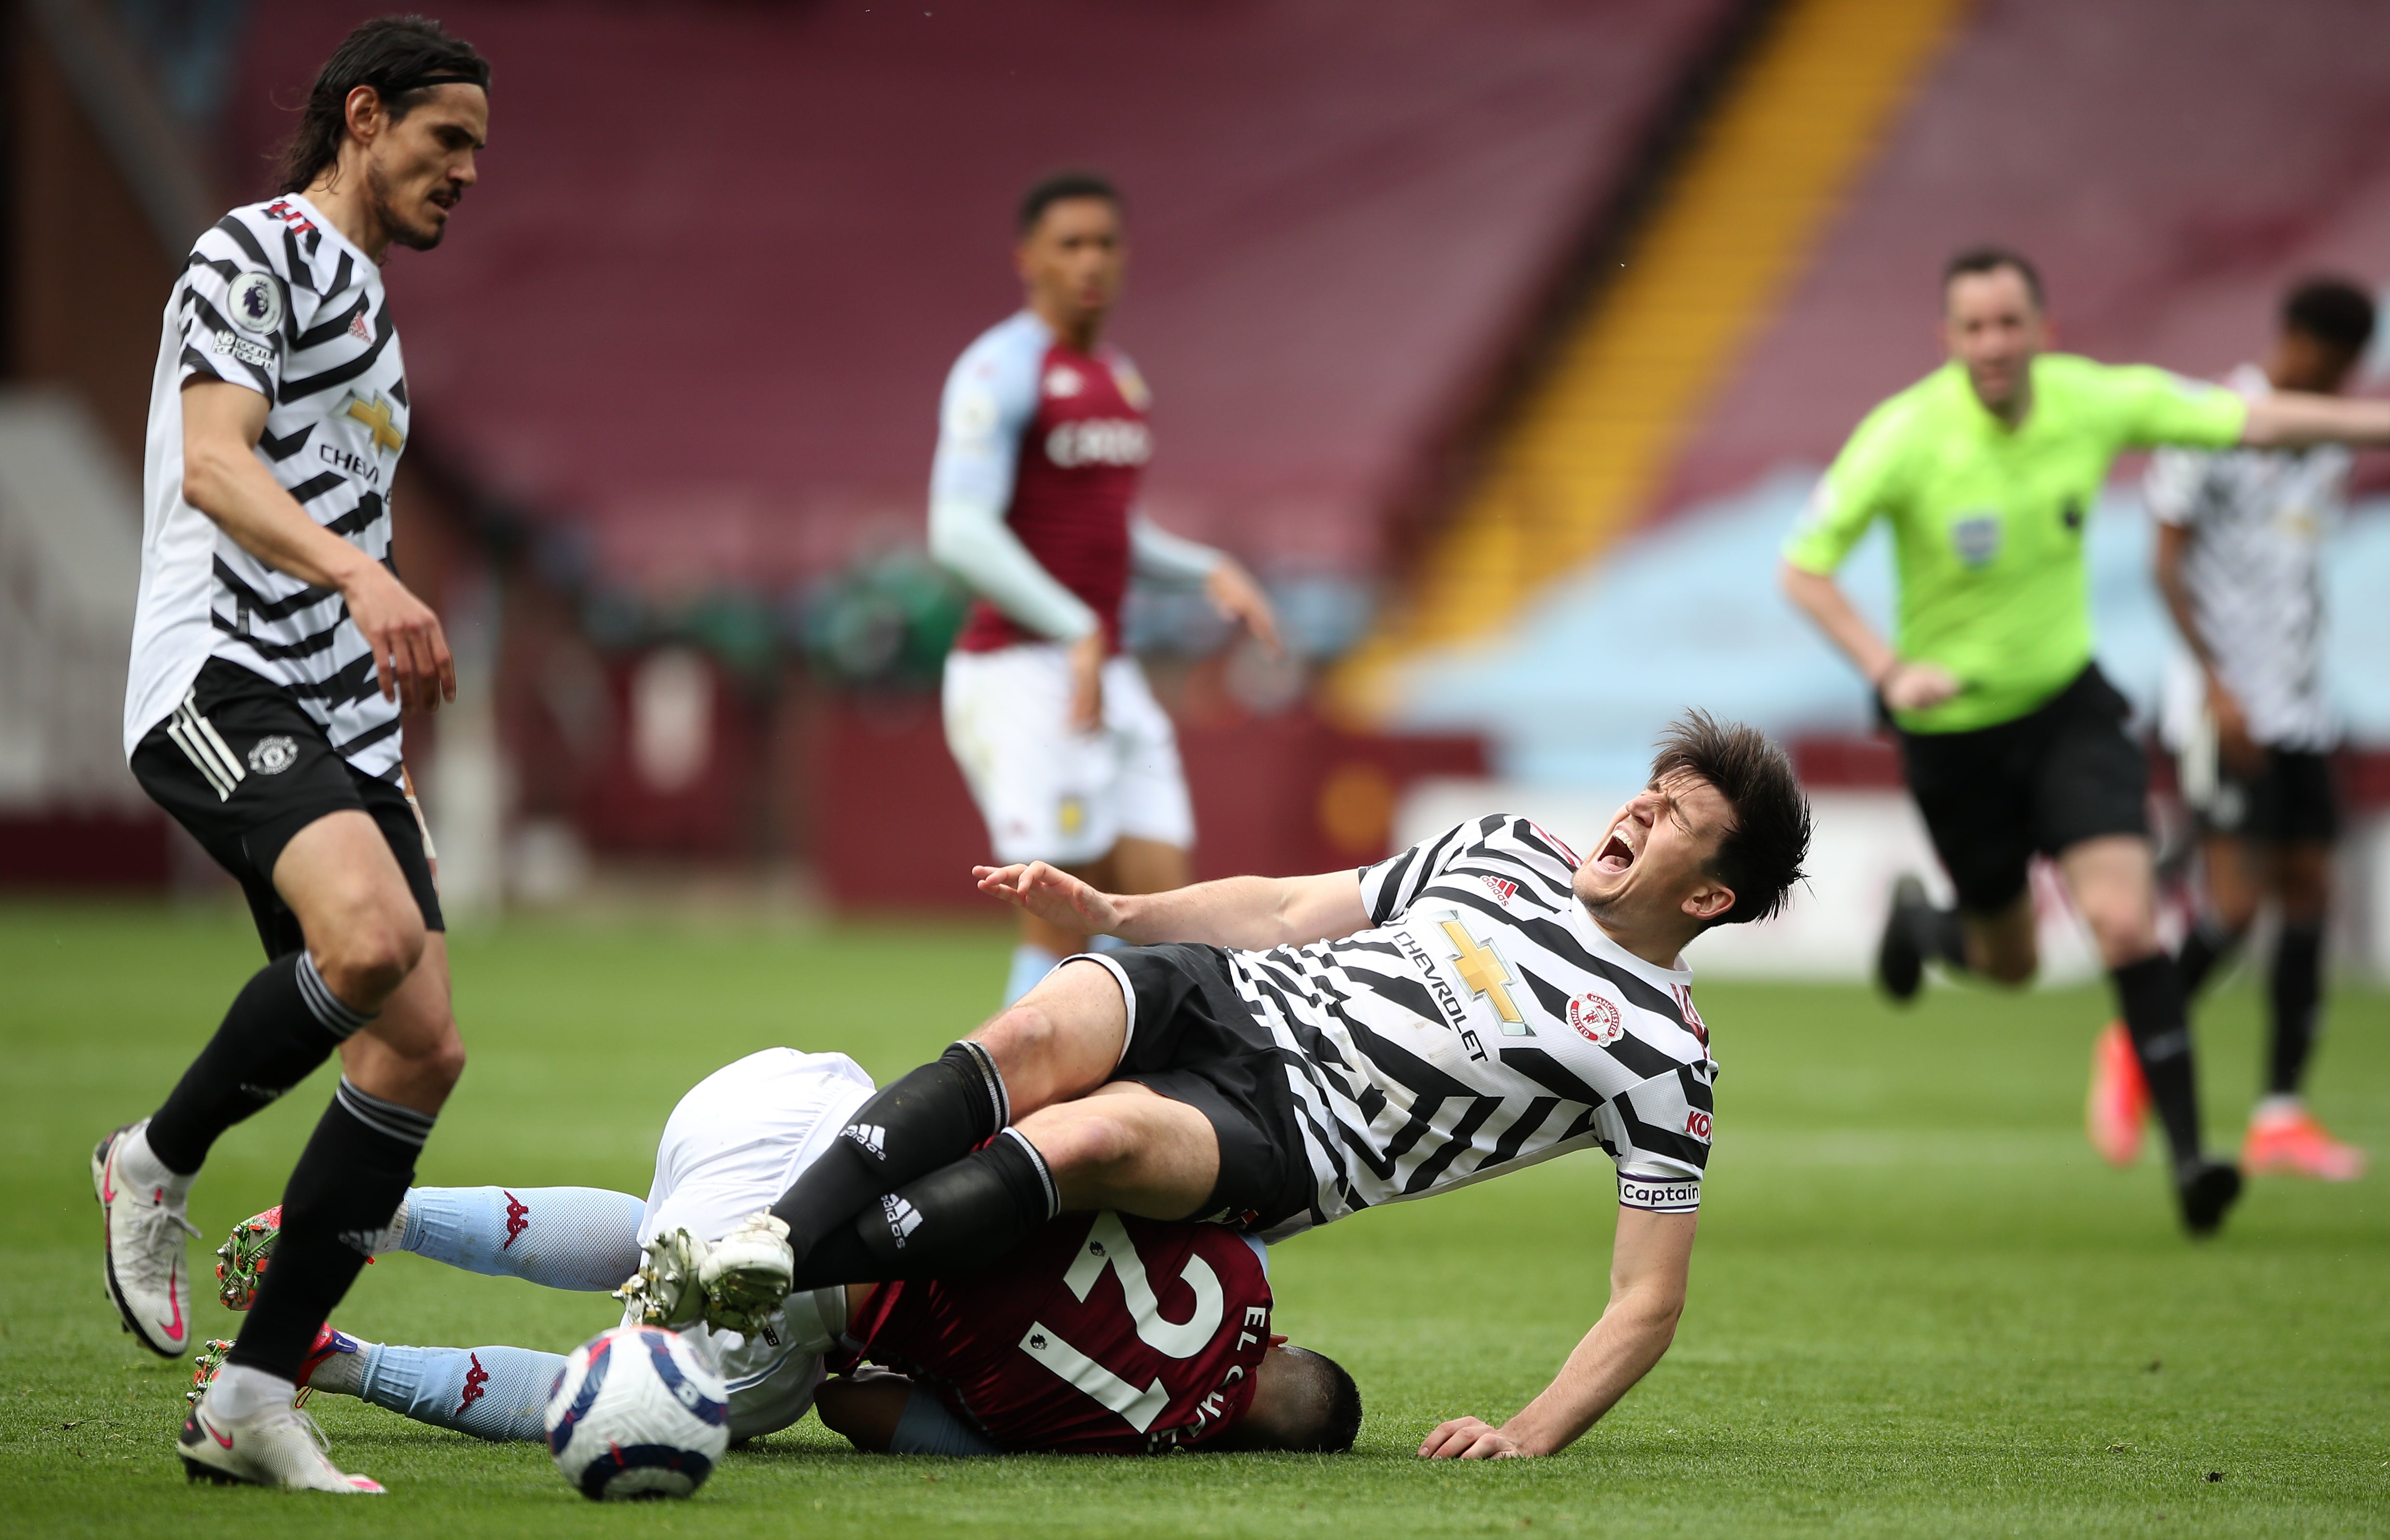 Harry Maguire appeared to injure his left ankle at Villa Park